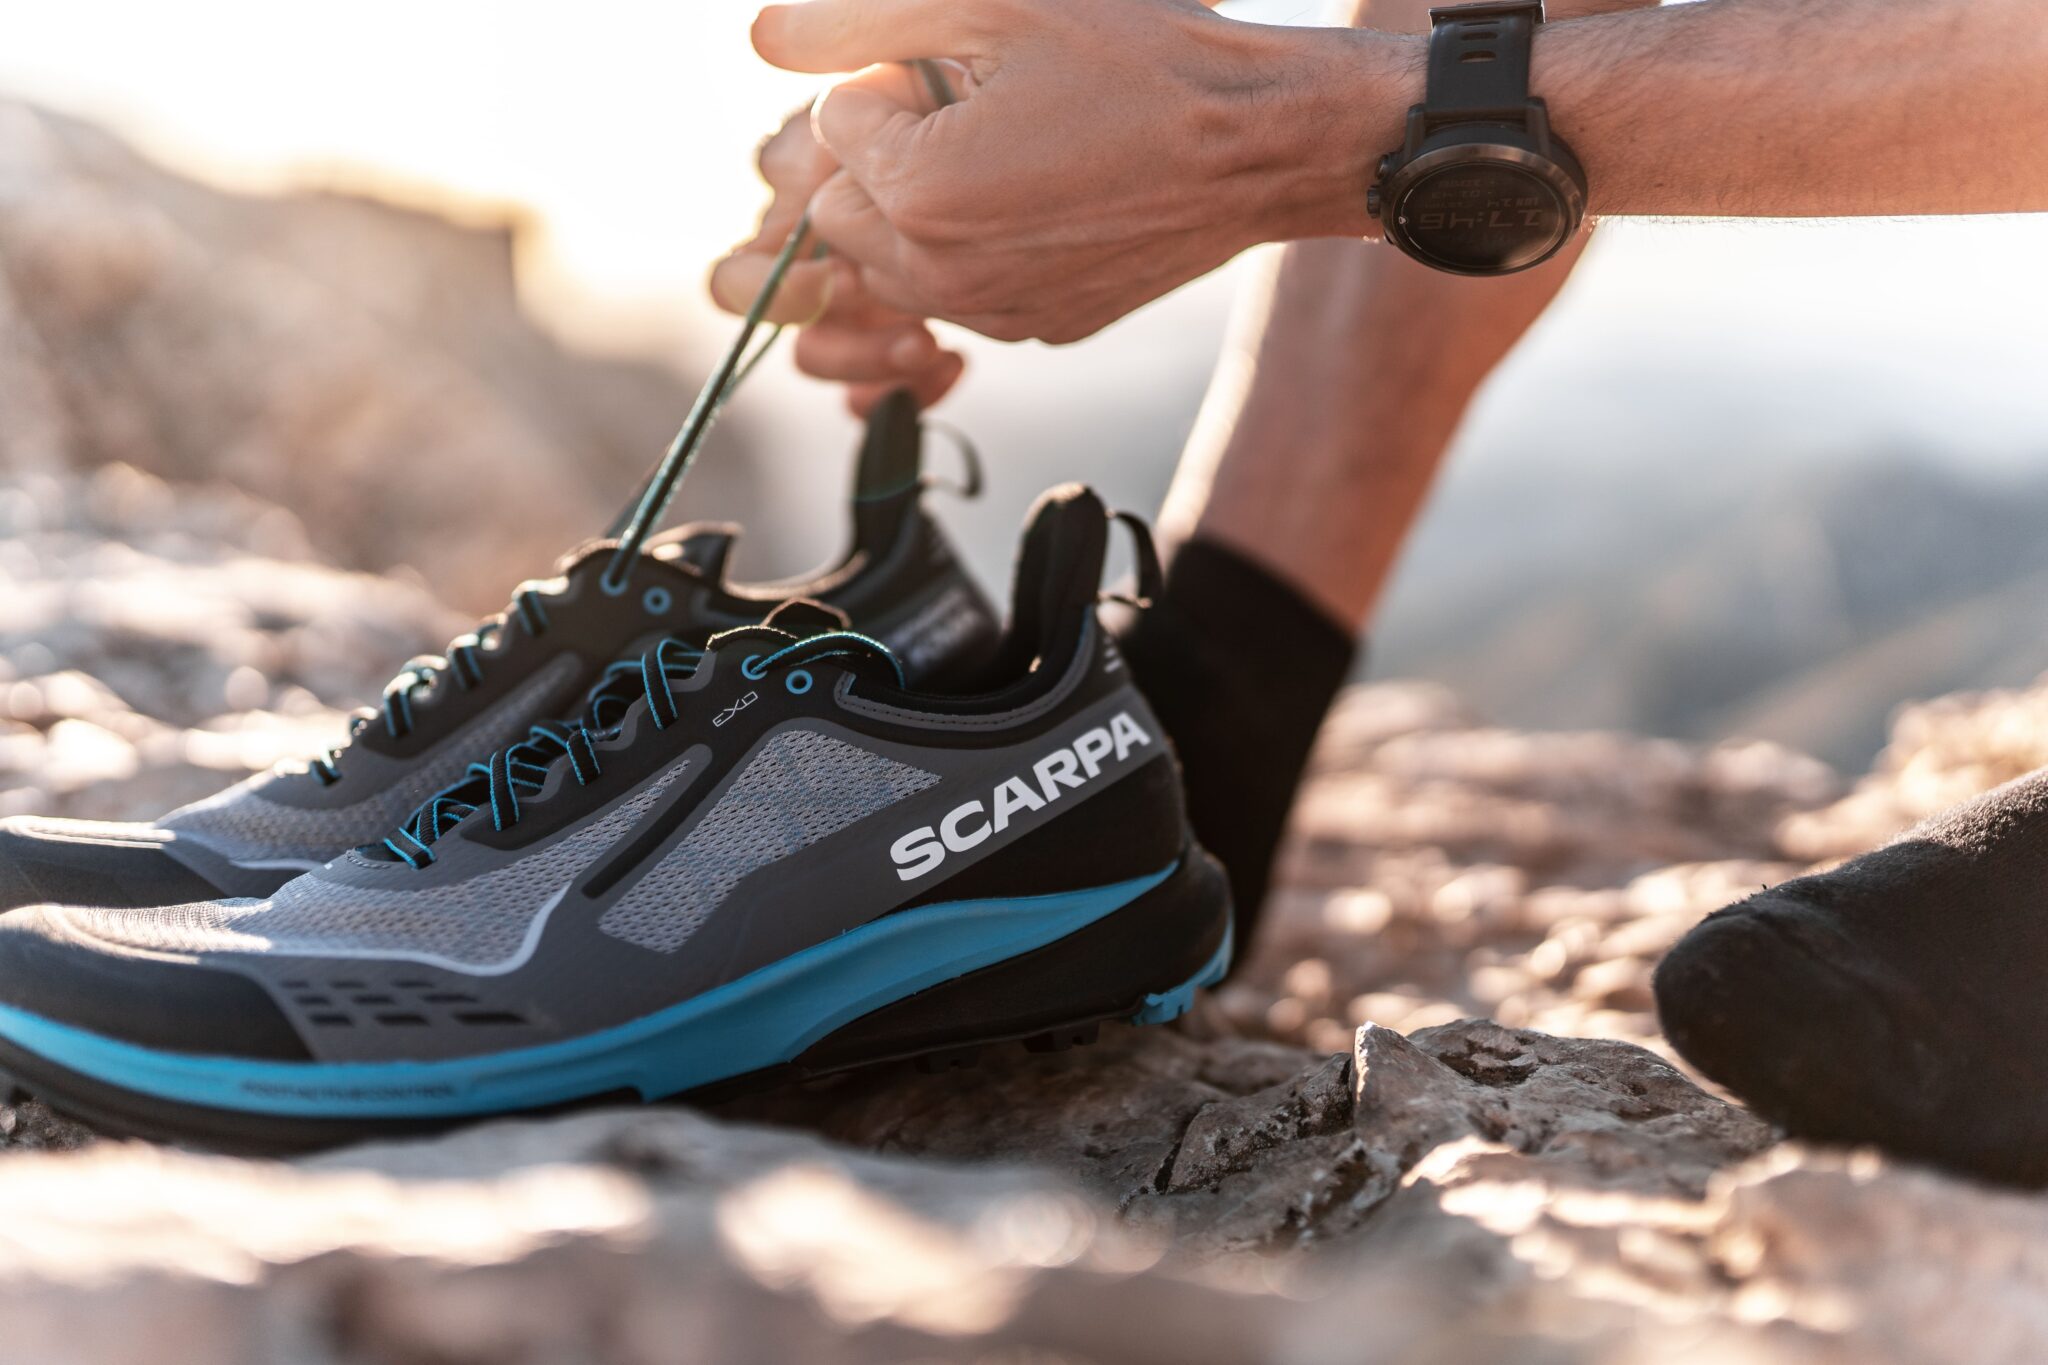 Scarpa Golden Gate Kima RT - Test and Review - Ultra Runner Mag